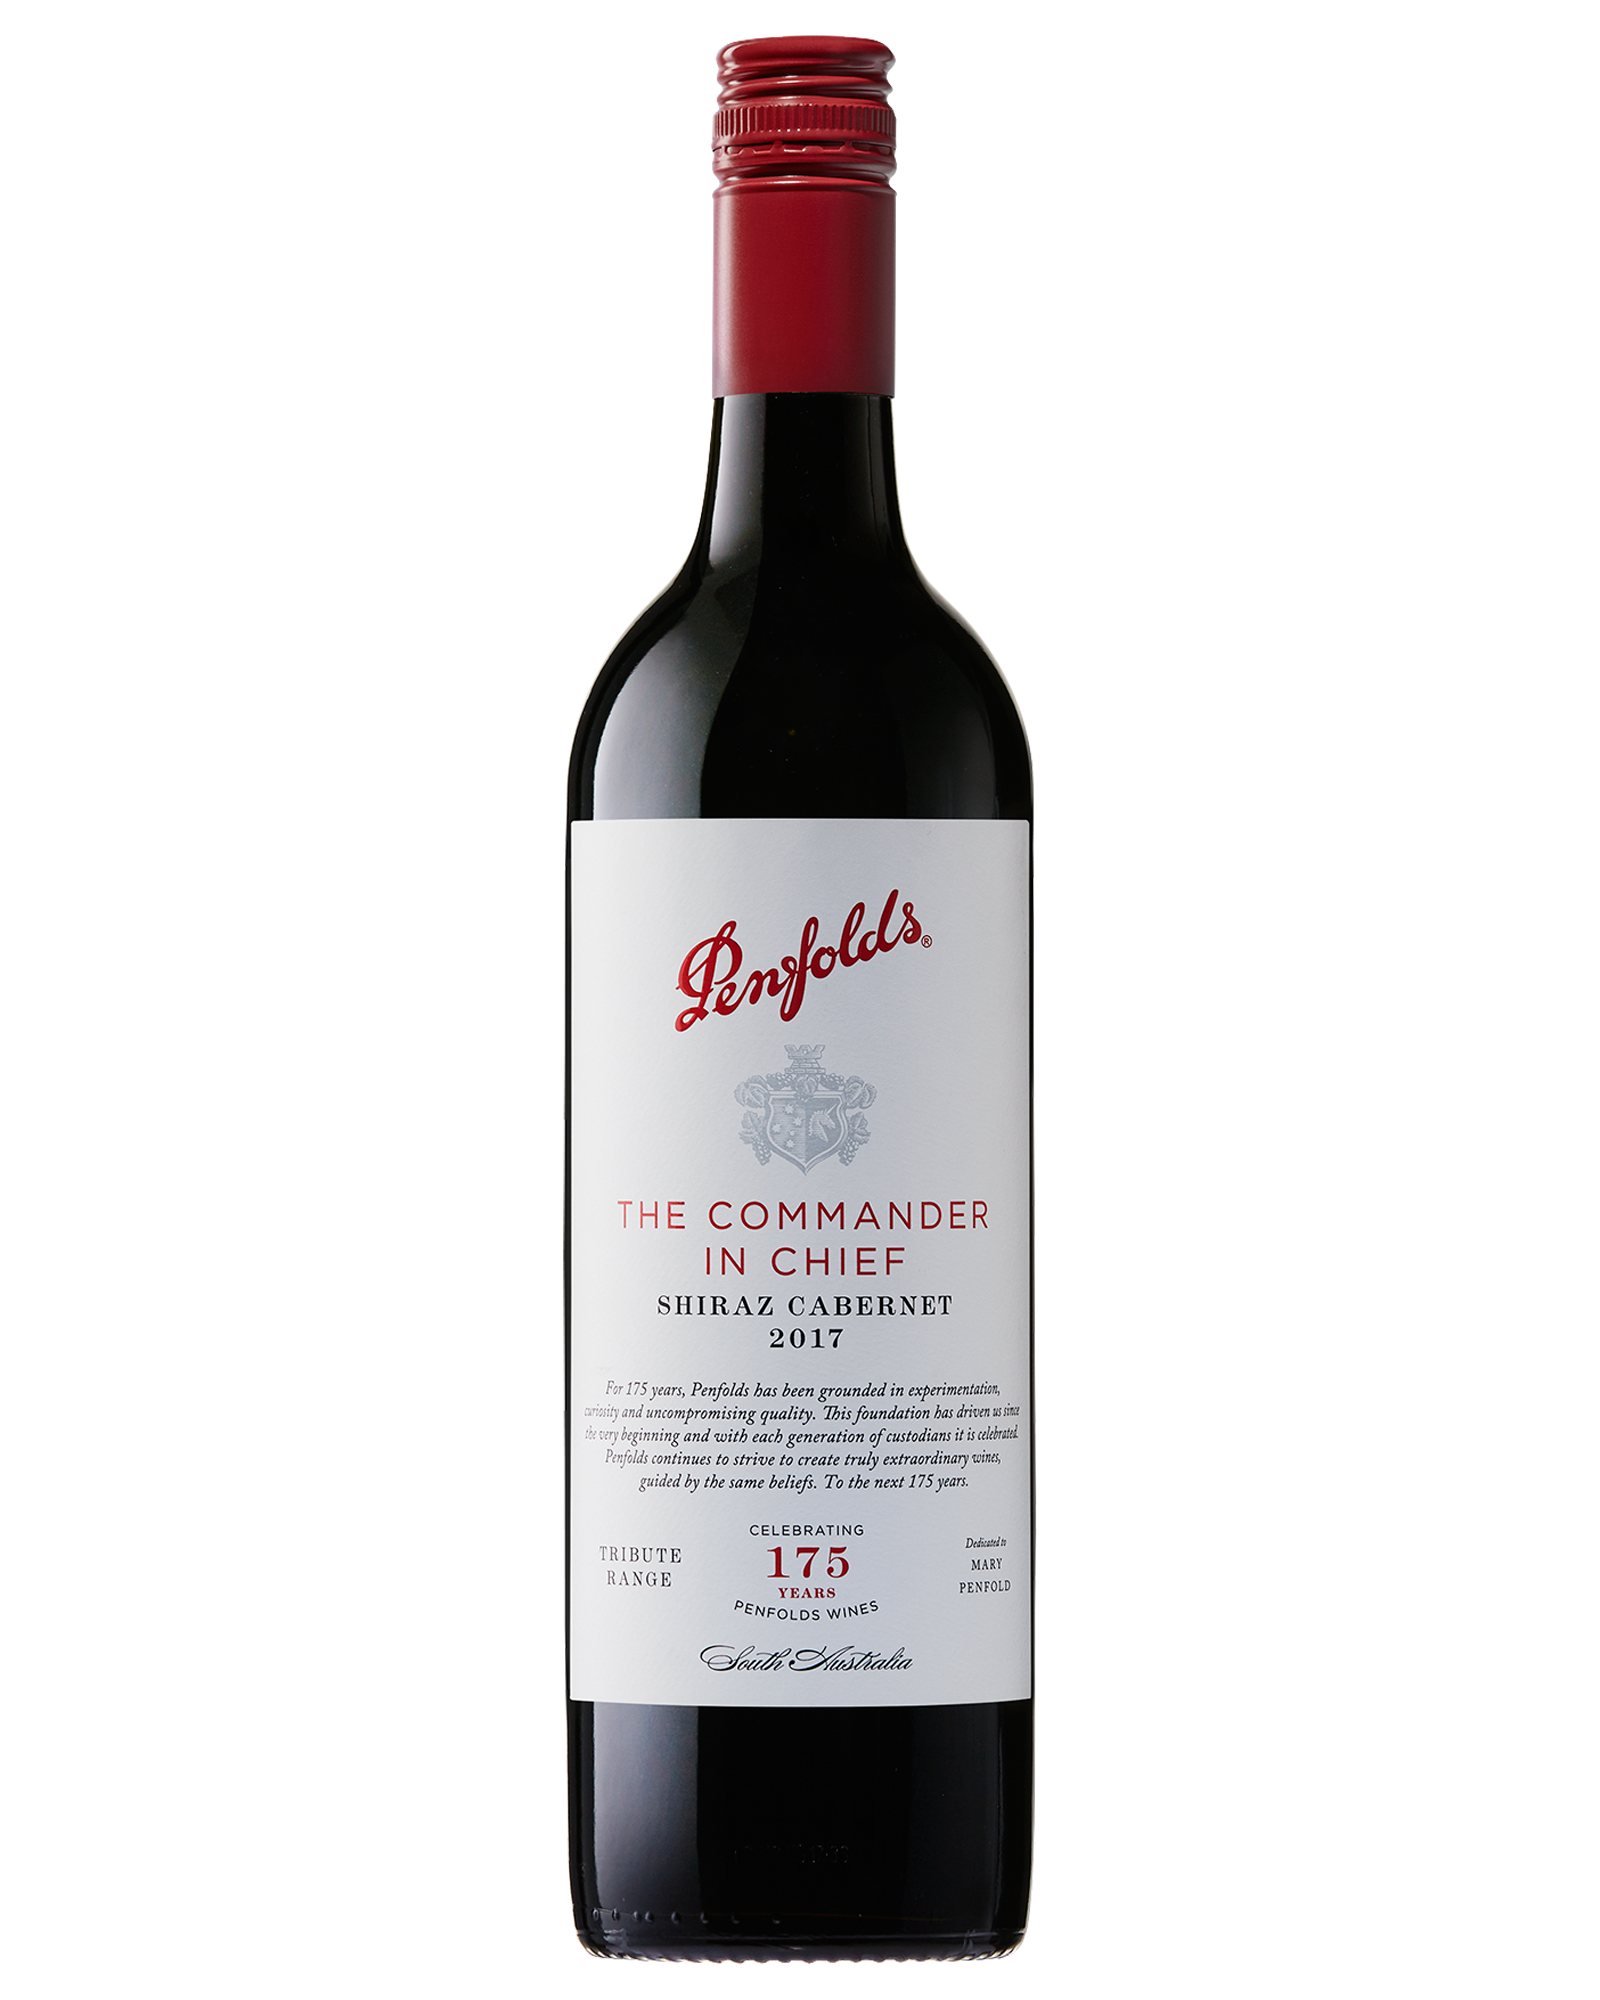 Penfolds The Commander in Chief Shiraz Cabernet